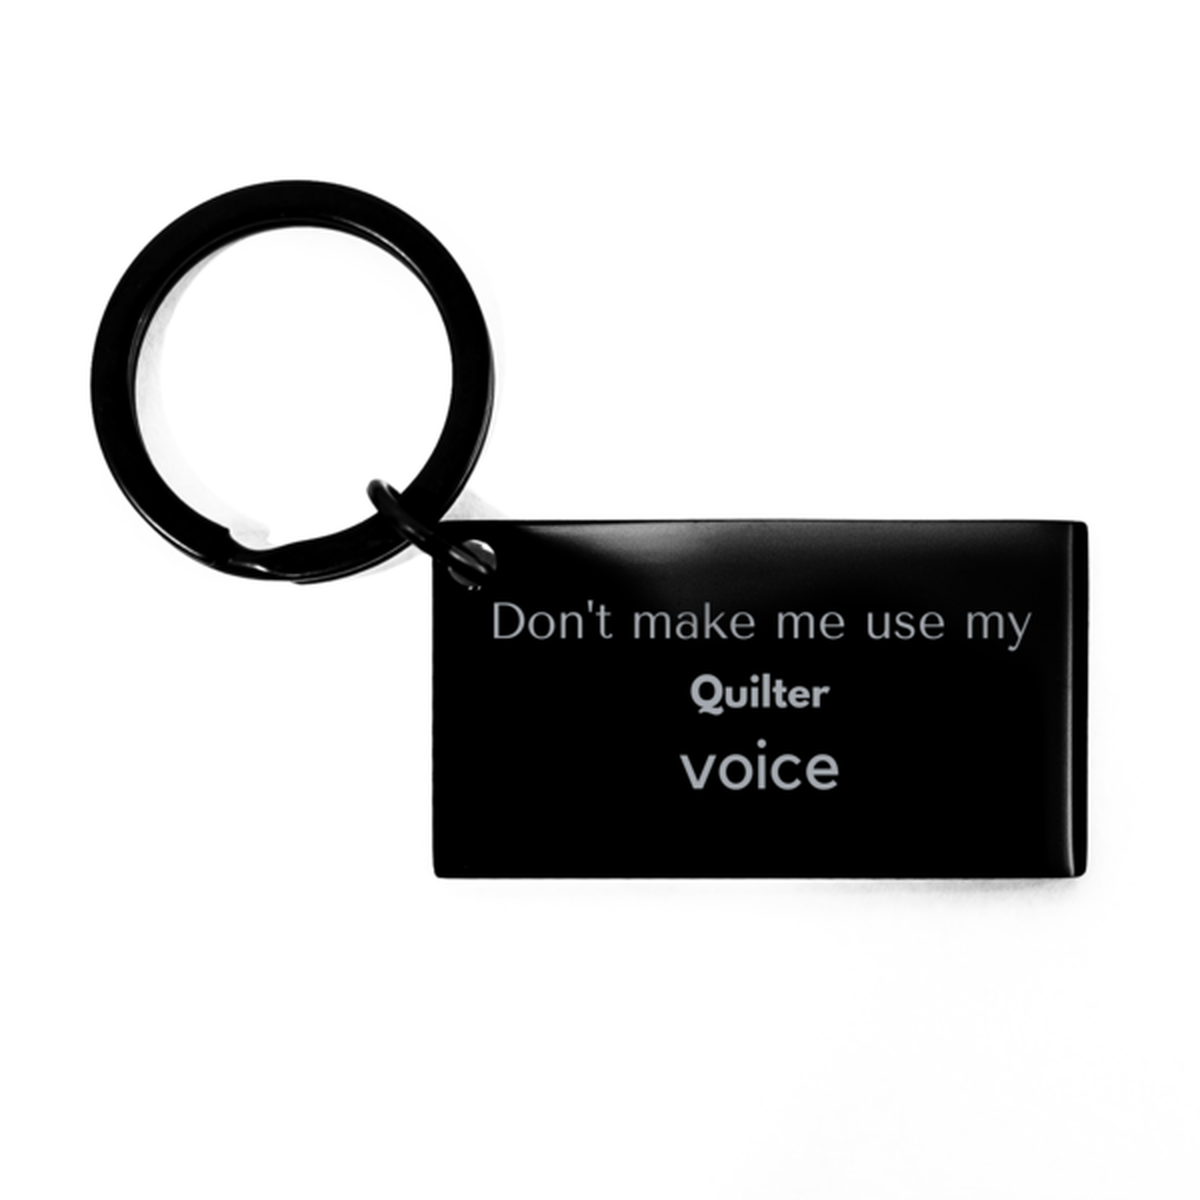 Don't make me use my Quilter voice, Sarcasm Quilter Gifts, Christmas Quilter Keychain Birthday Unique Gifts For Quilter Coworkers, Men, Women, Colleague, Friends